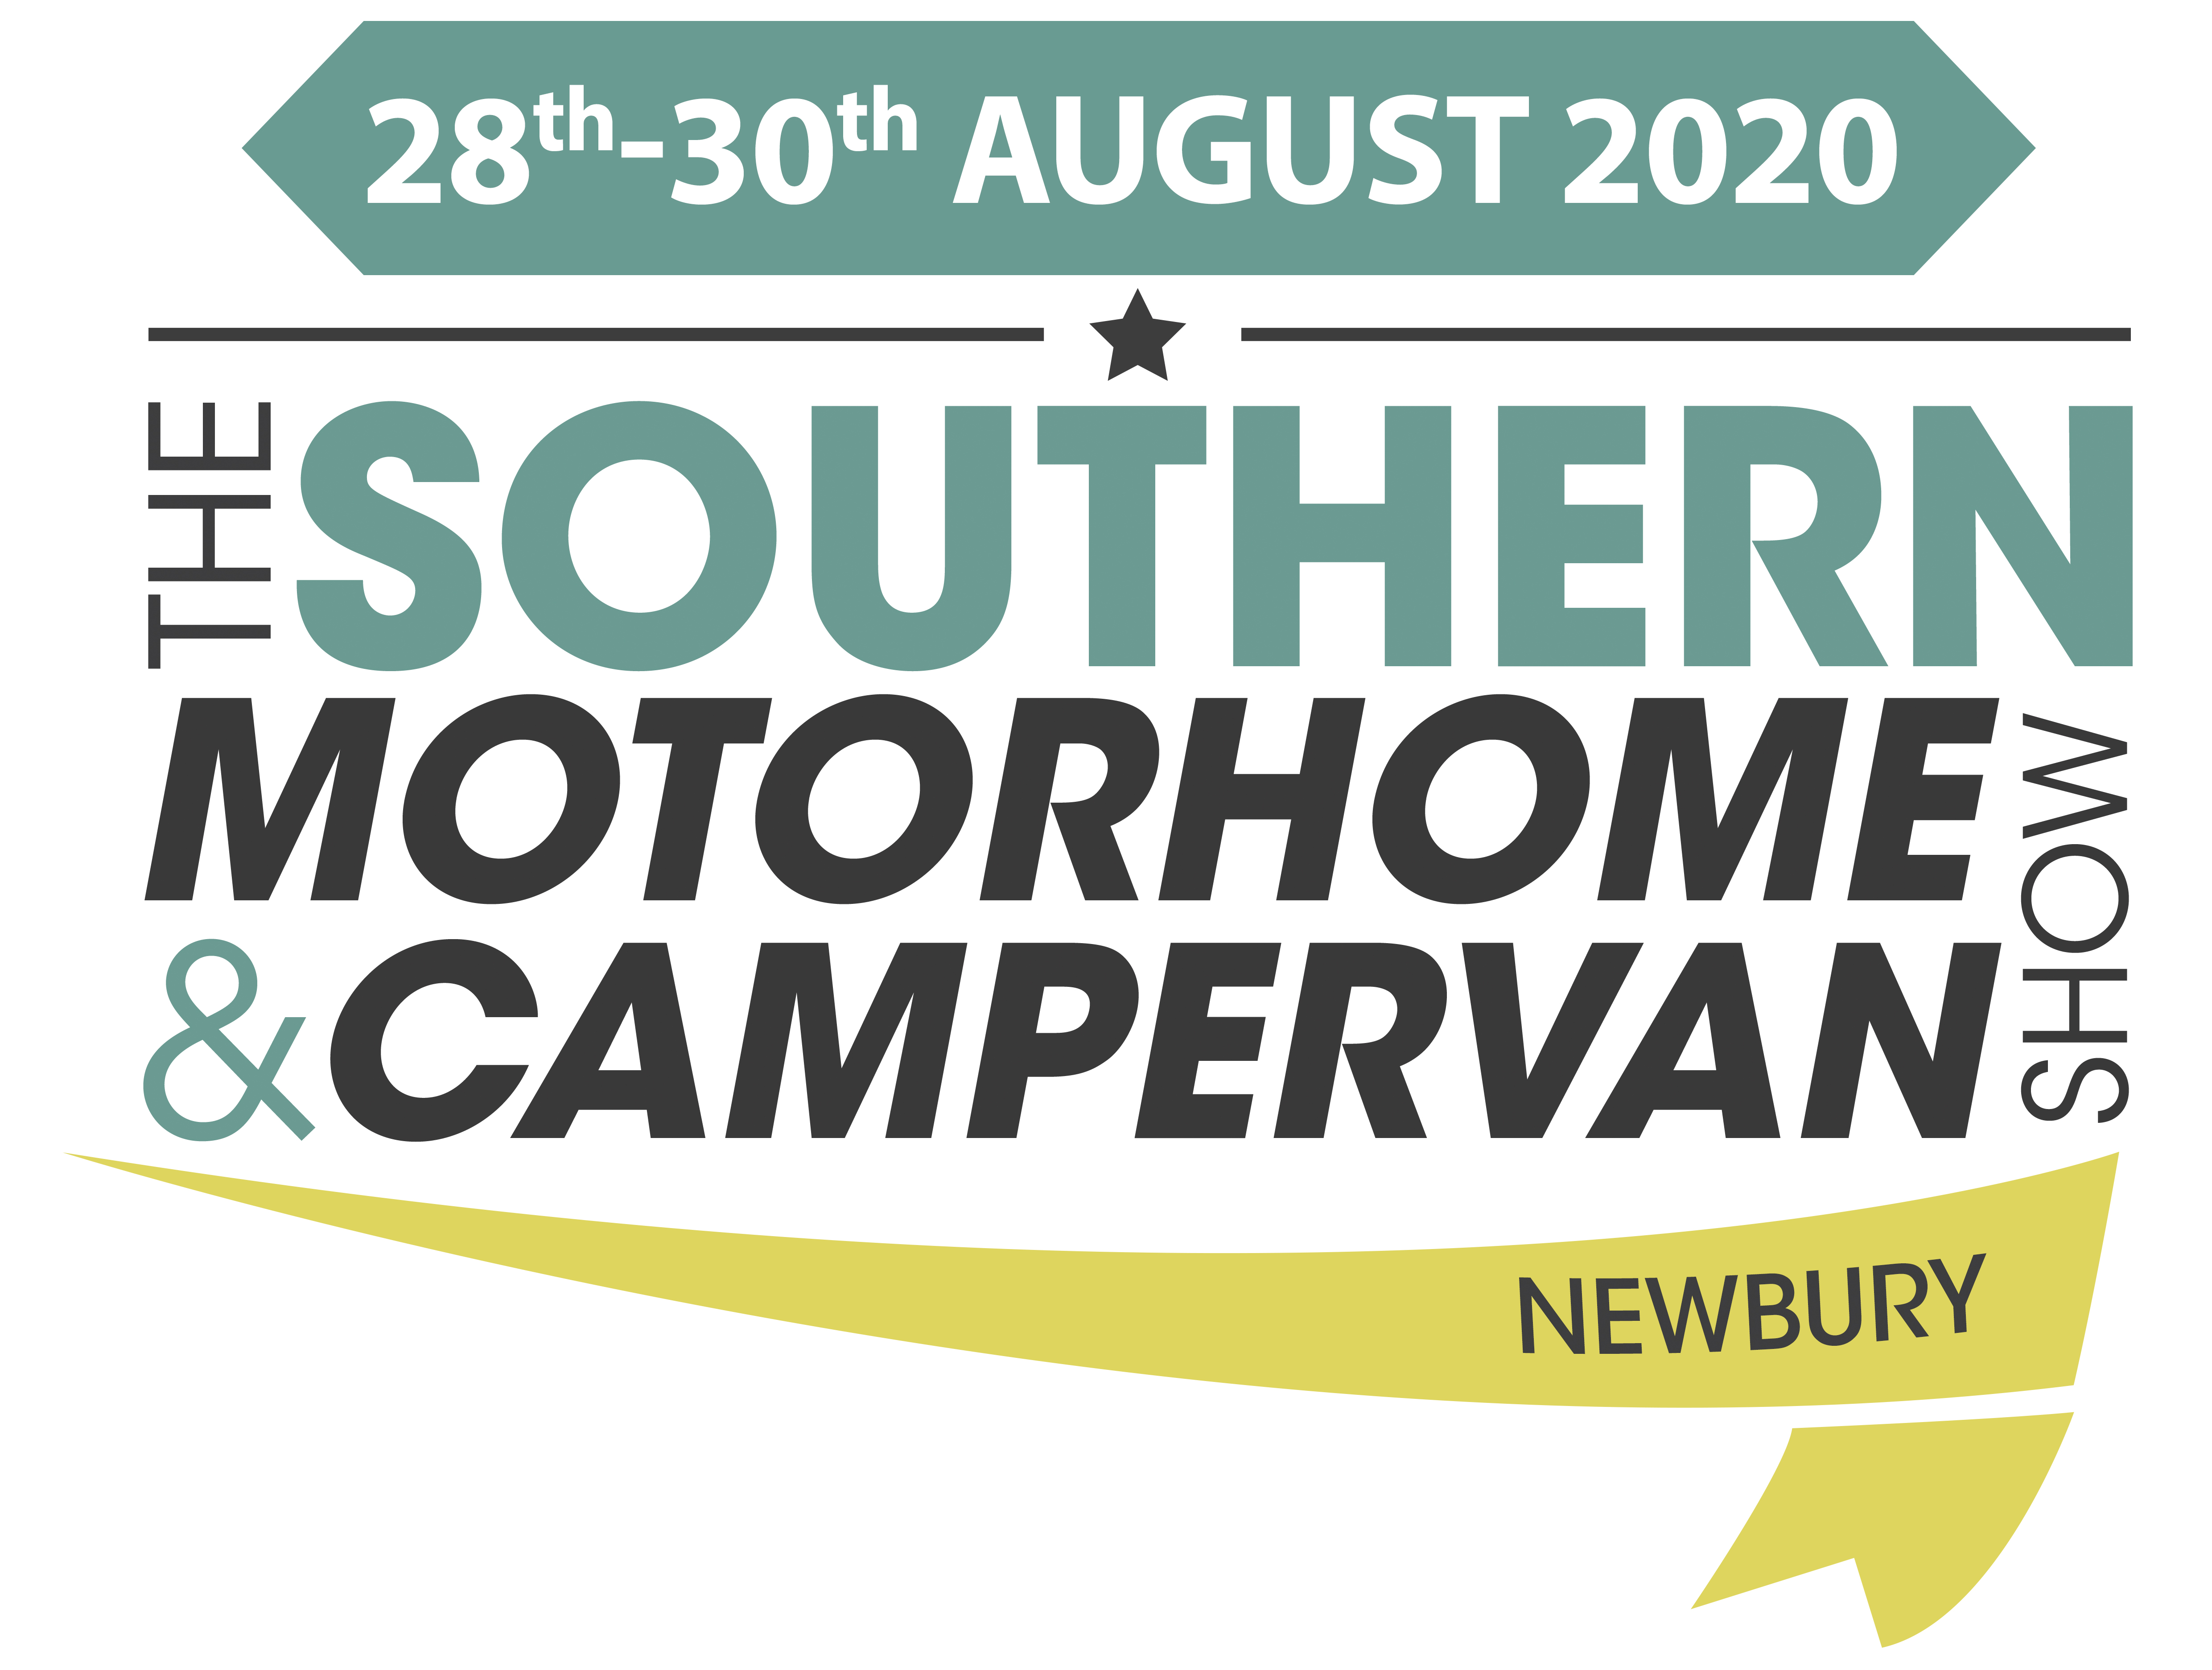 The Southern Motorhome & Campervan Show, 28-30th August 2020